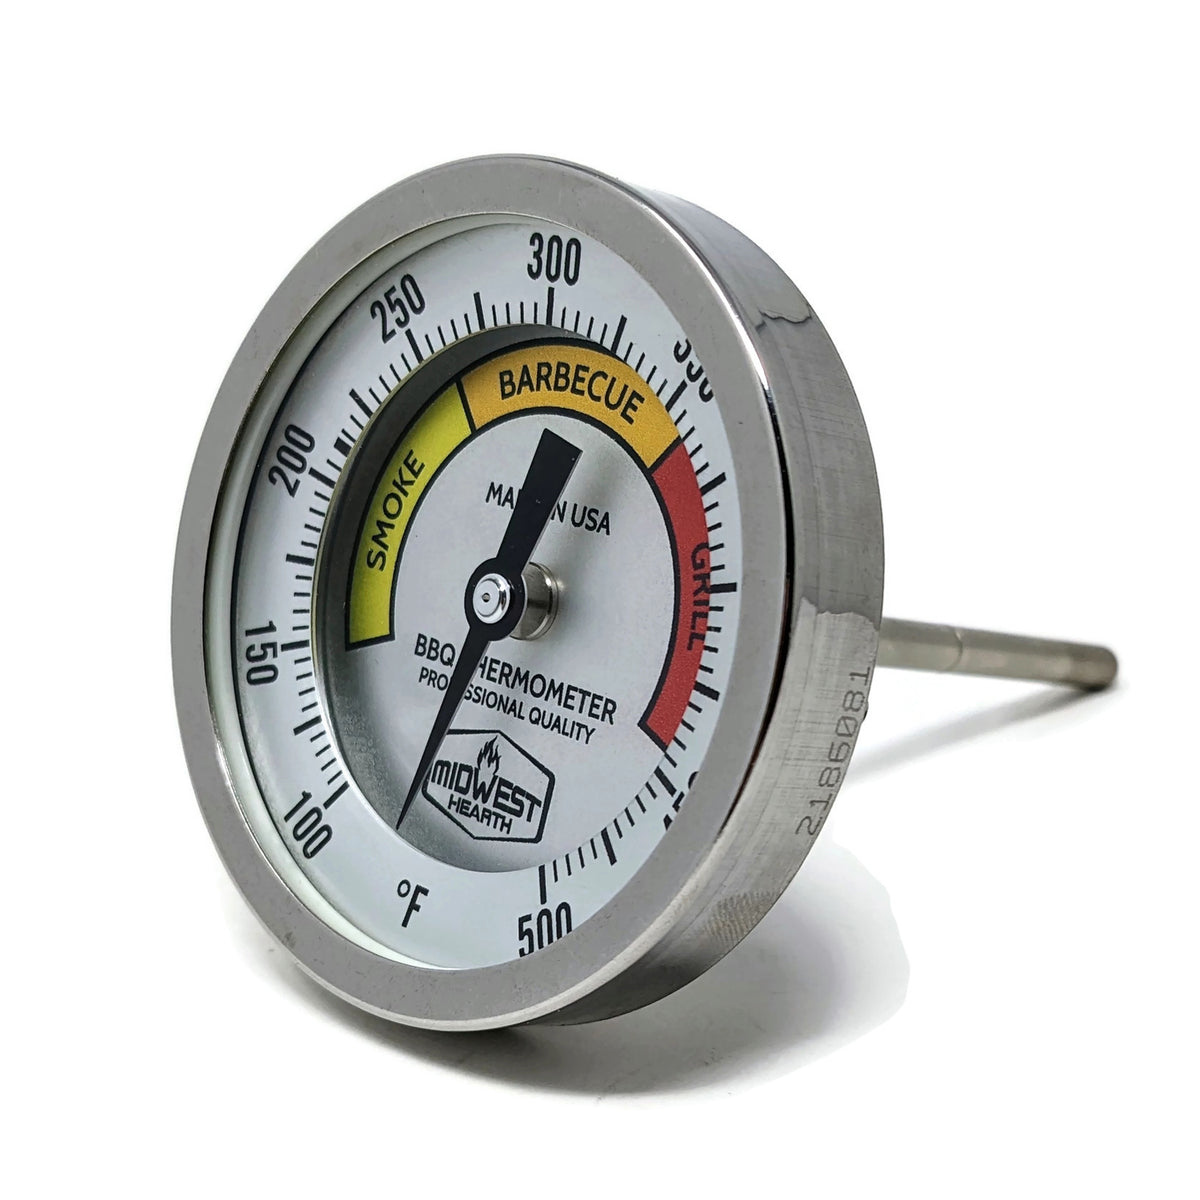 BBQ grill smoker thermometer